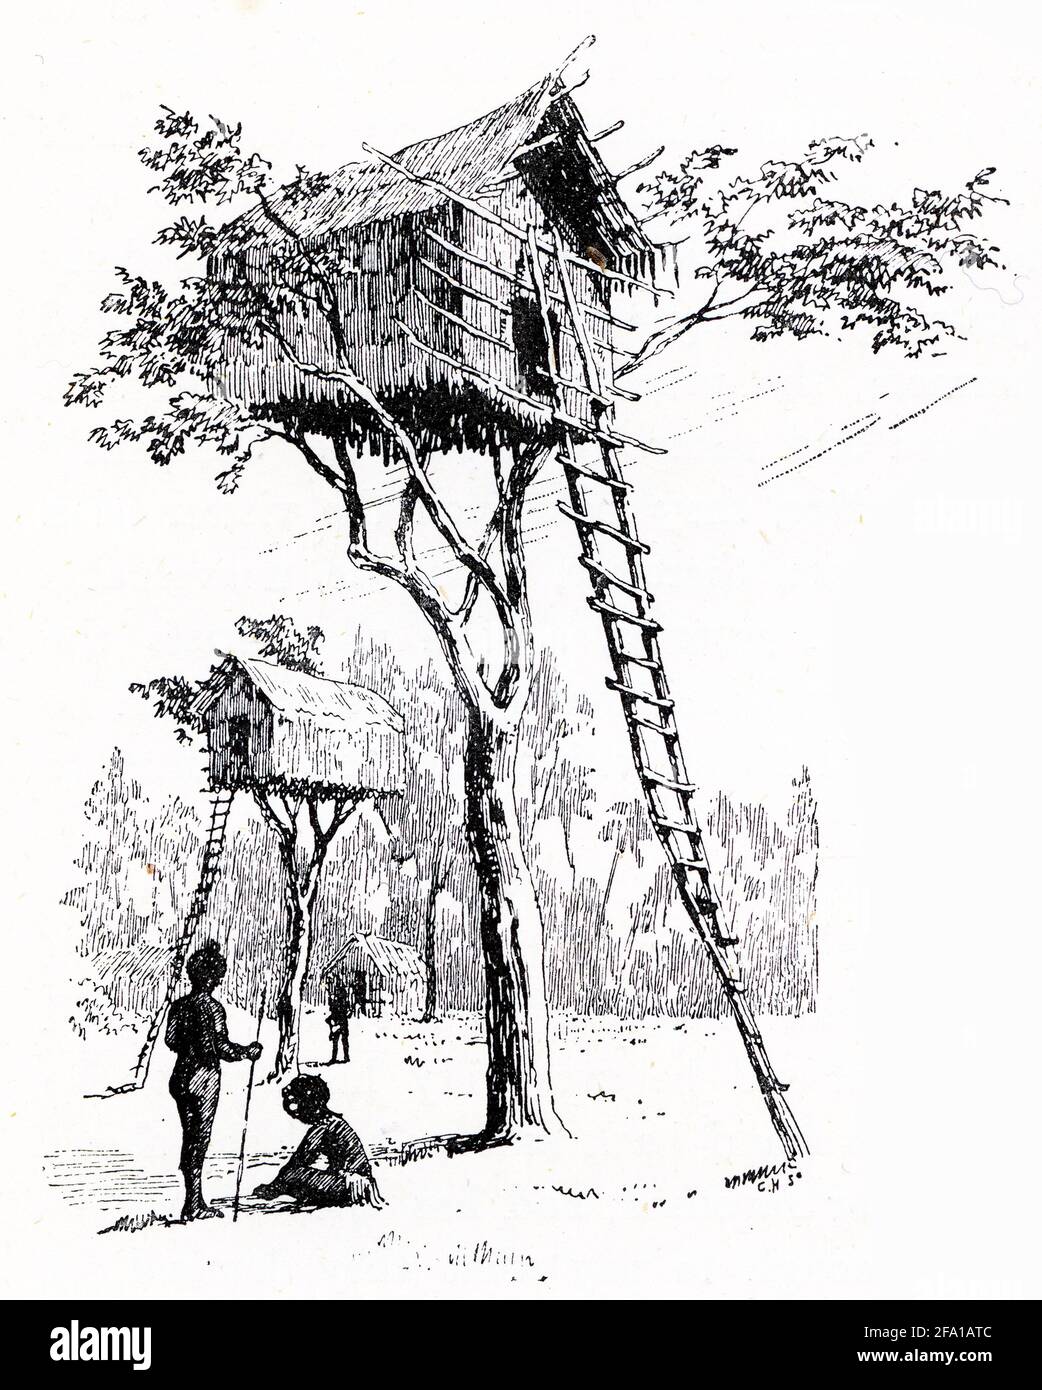 Engraving of a tree house in Papua New Guinea Stock Photo